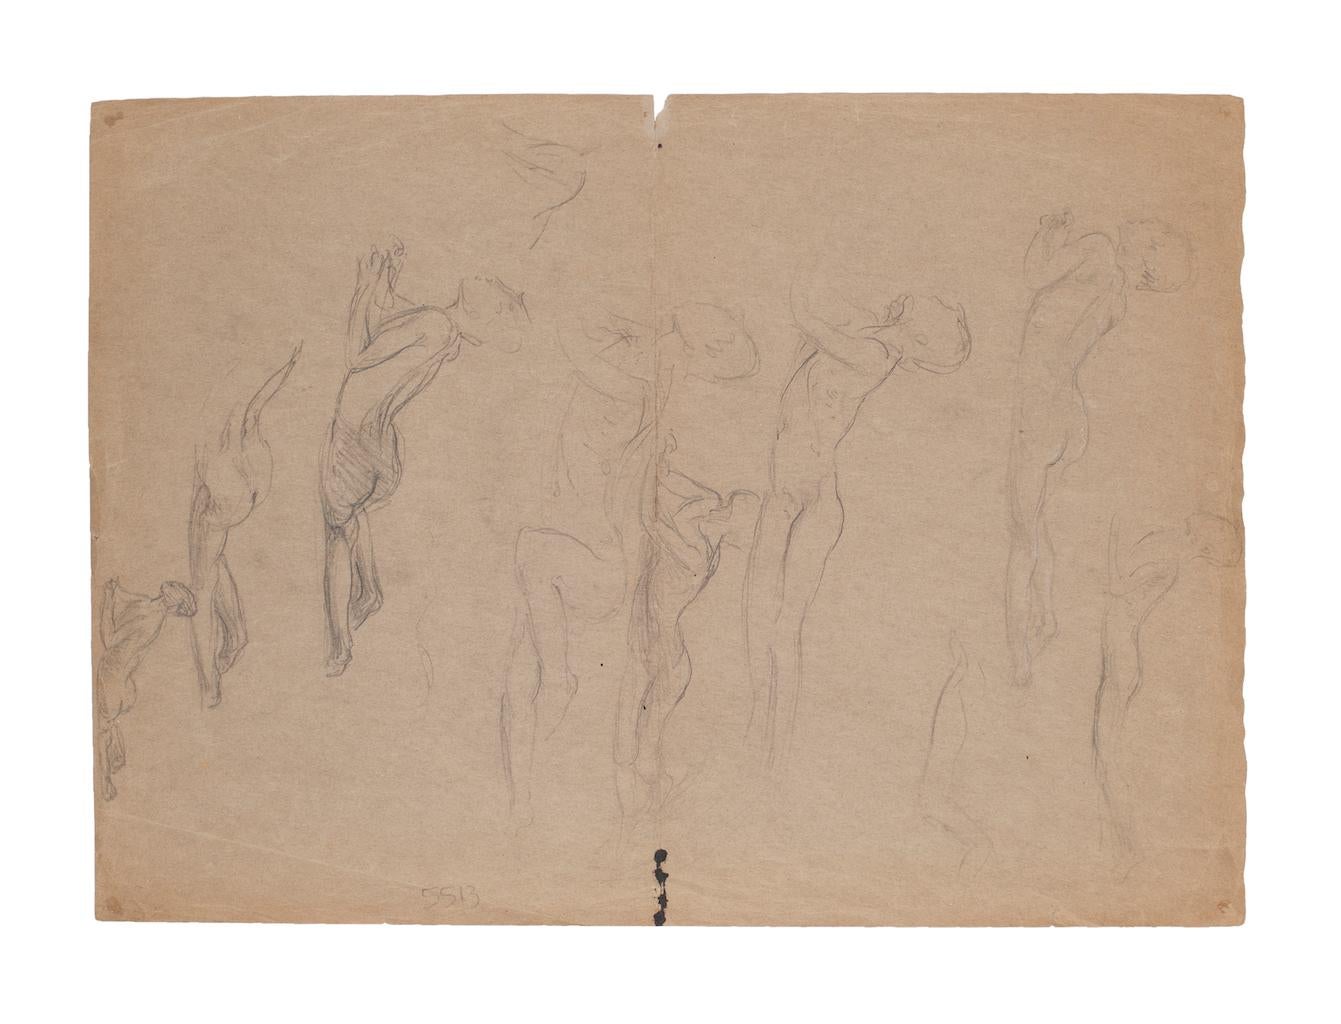 Sketch of Nude- Pencil on Brownish Paper - 20th Century - Art by Unknown